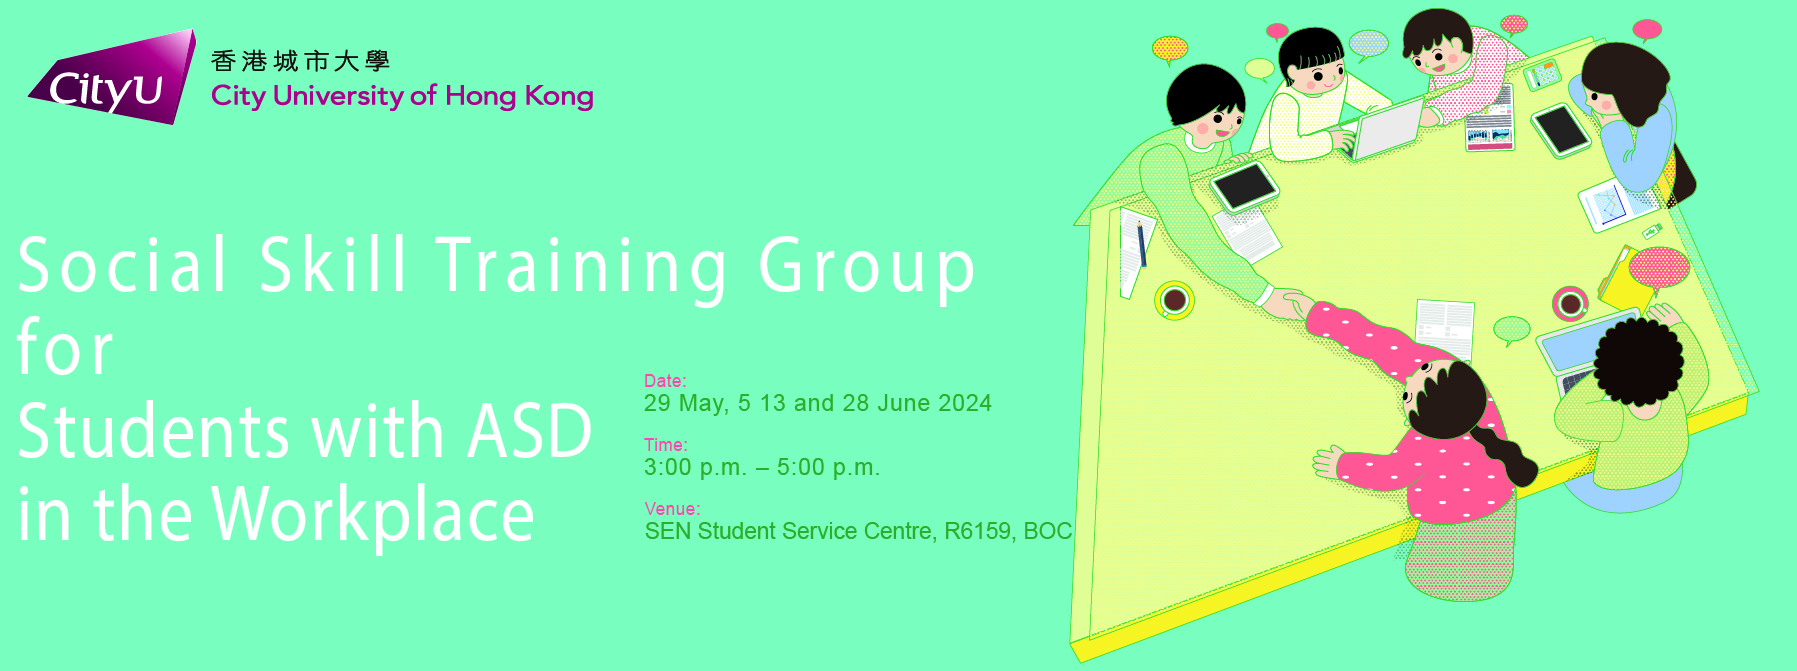 Social Skill Training Group for Students with ASD in the Workplace